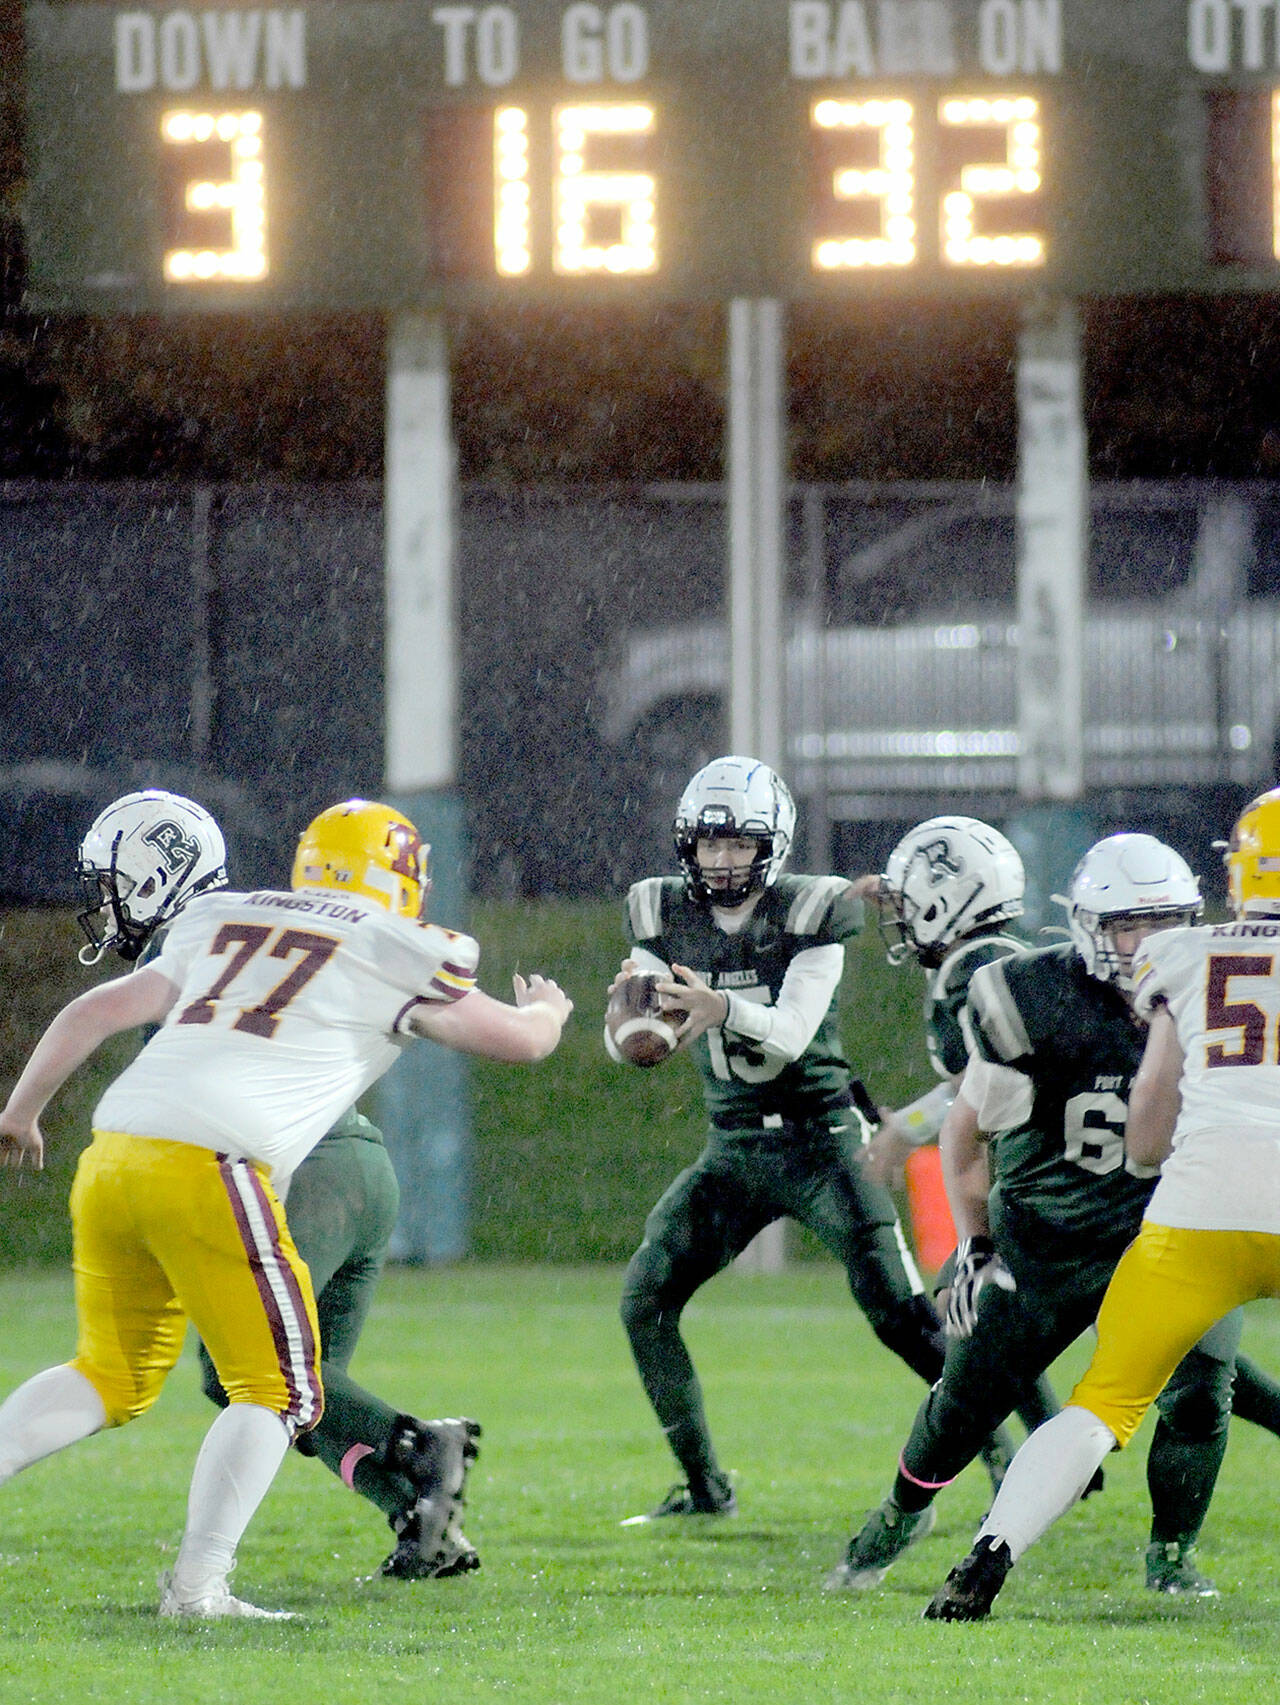 Port Angeles quarterback Parker Nickerson, center, drops back to pass as Kingston’s Tyler Rose tries to break through the line on a rainy Friday evening in Port Angeles. (KEITH THORPE/PENINSULA DAILY NEWS)